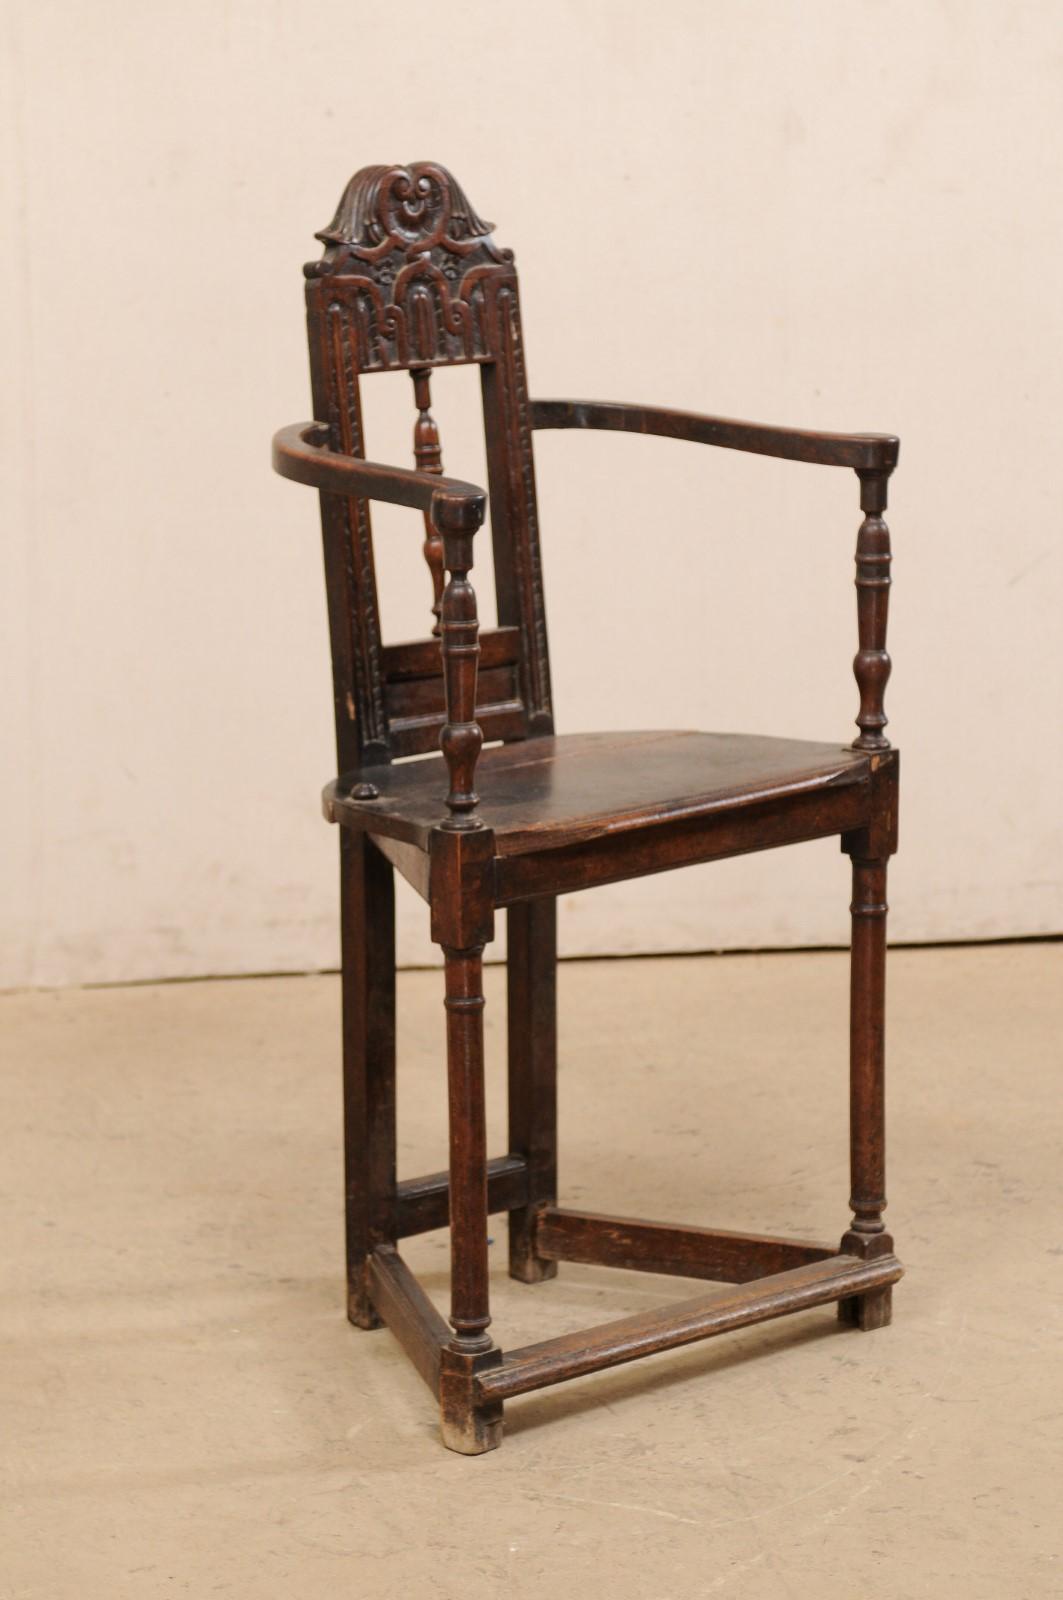 A Spanish carved-wood corner style armchair from the 17th century. This antique chair from Spain features a rectangular-shaped open back with turned post rest set vertically at center, and a beautifully carved top rail in winged scroll motif. The